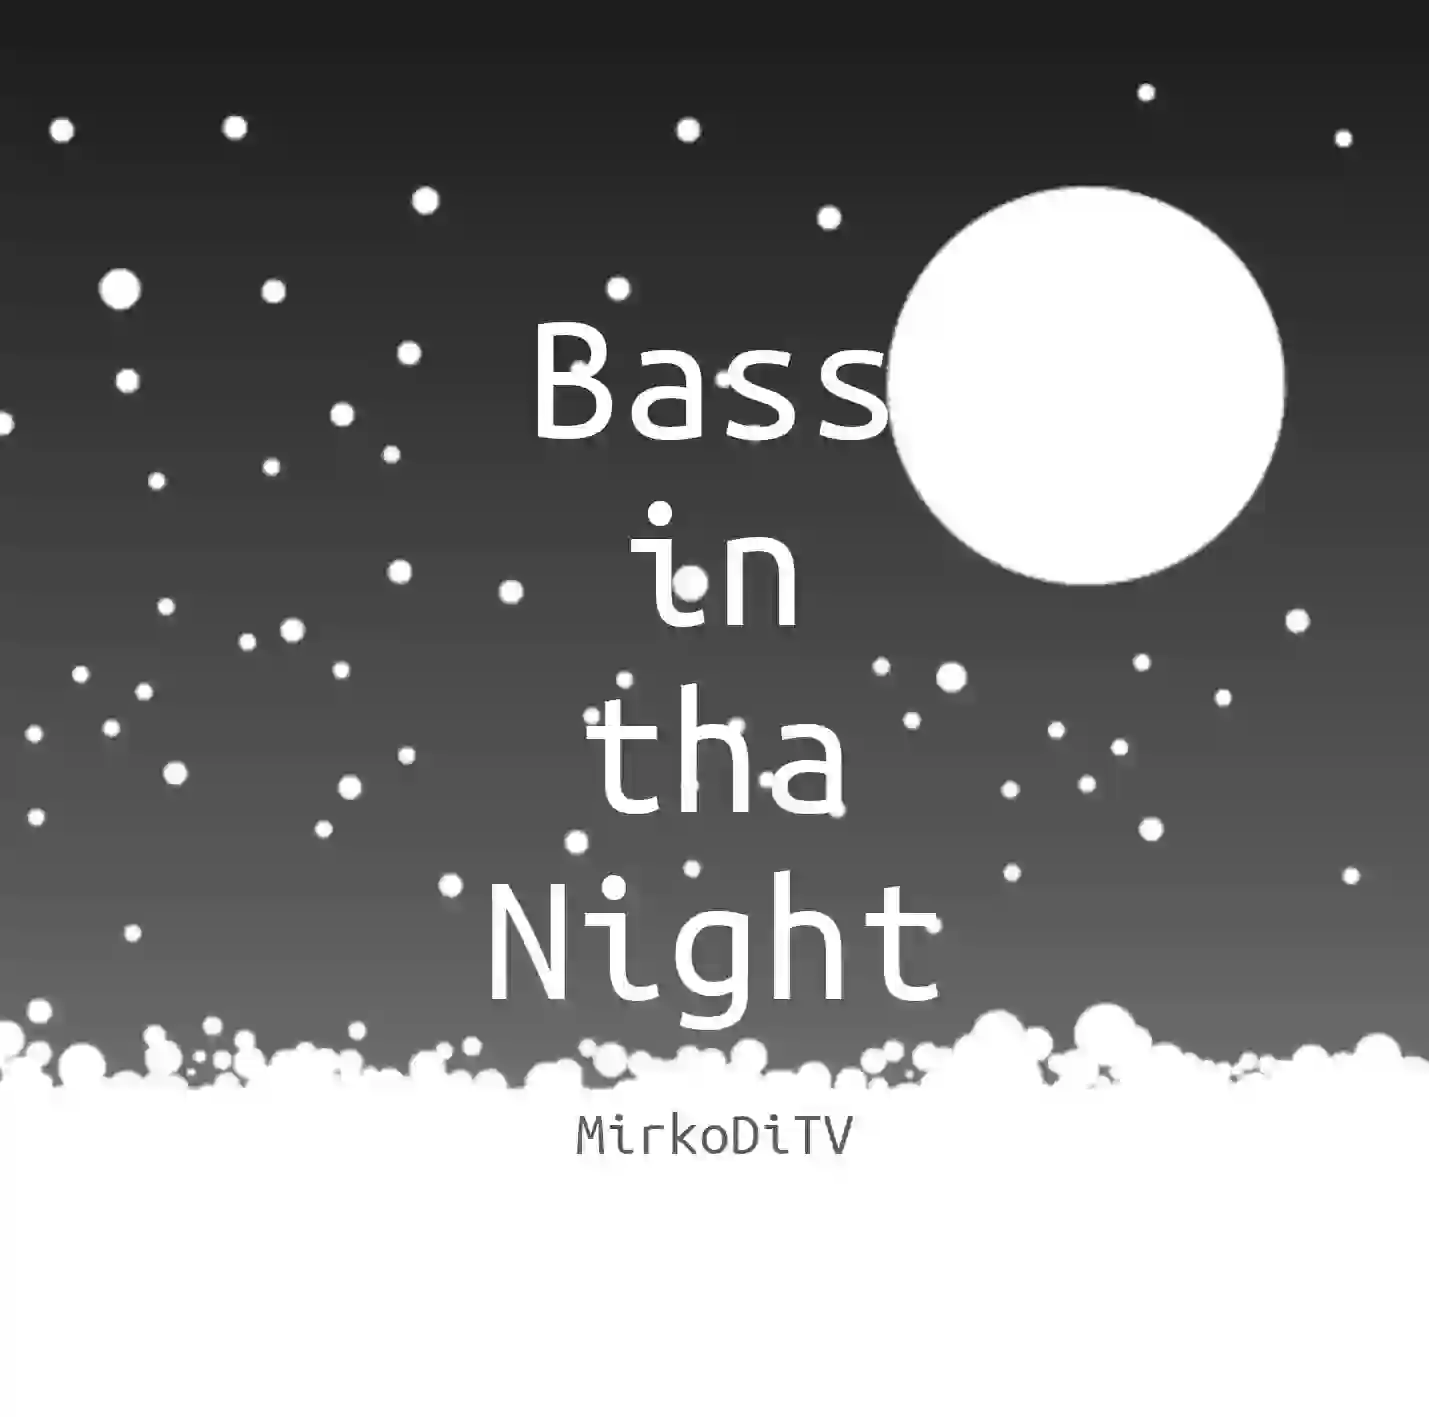 Very big 'Bass in tha Night - MirkoDiTV' text, a
                             night sky picture in the background